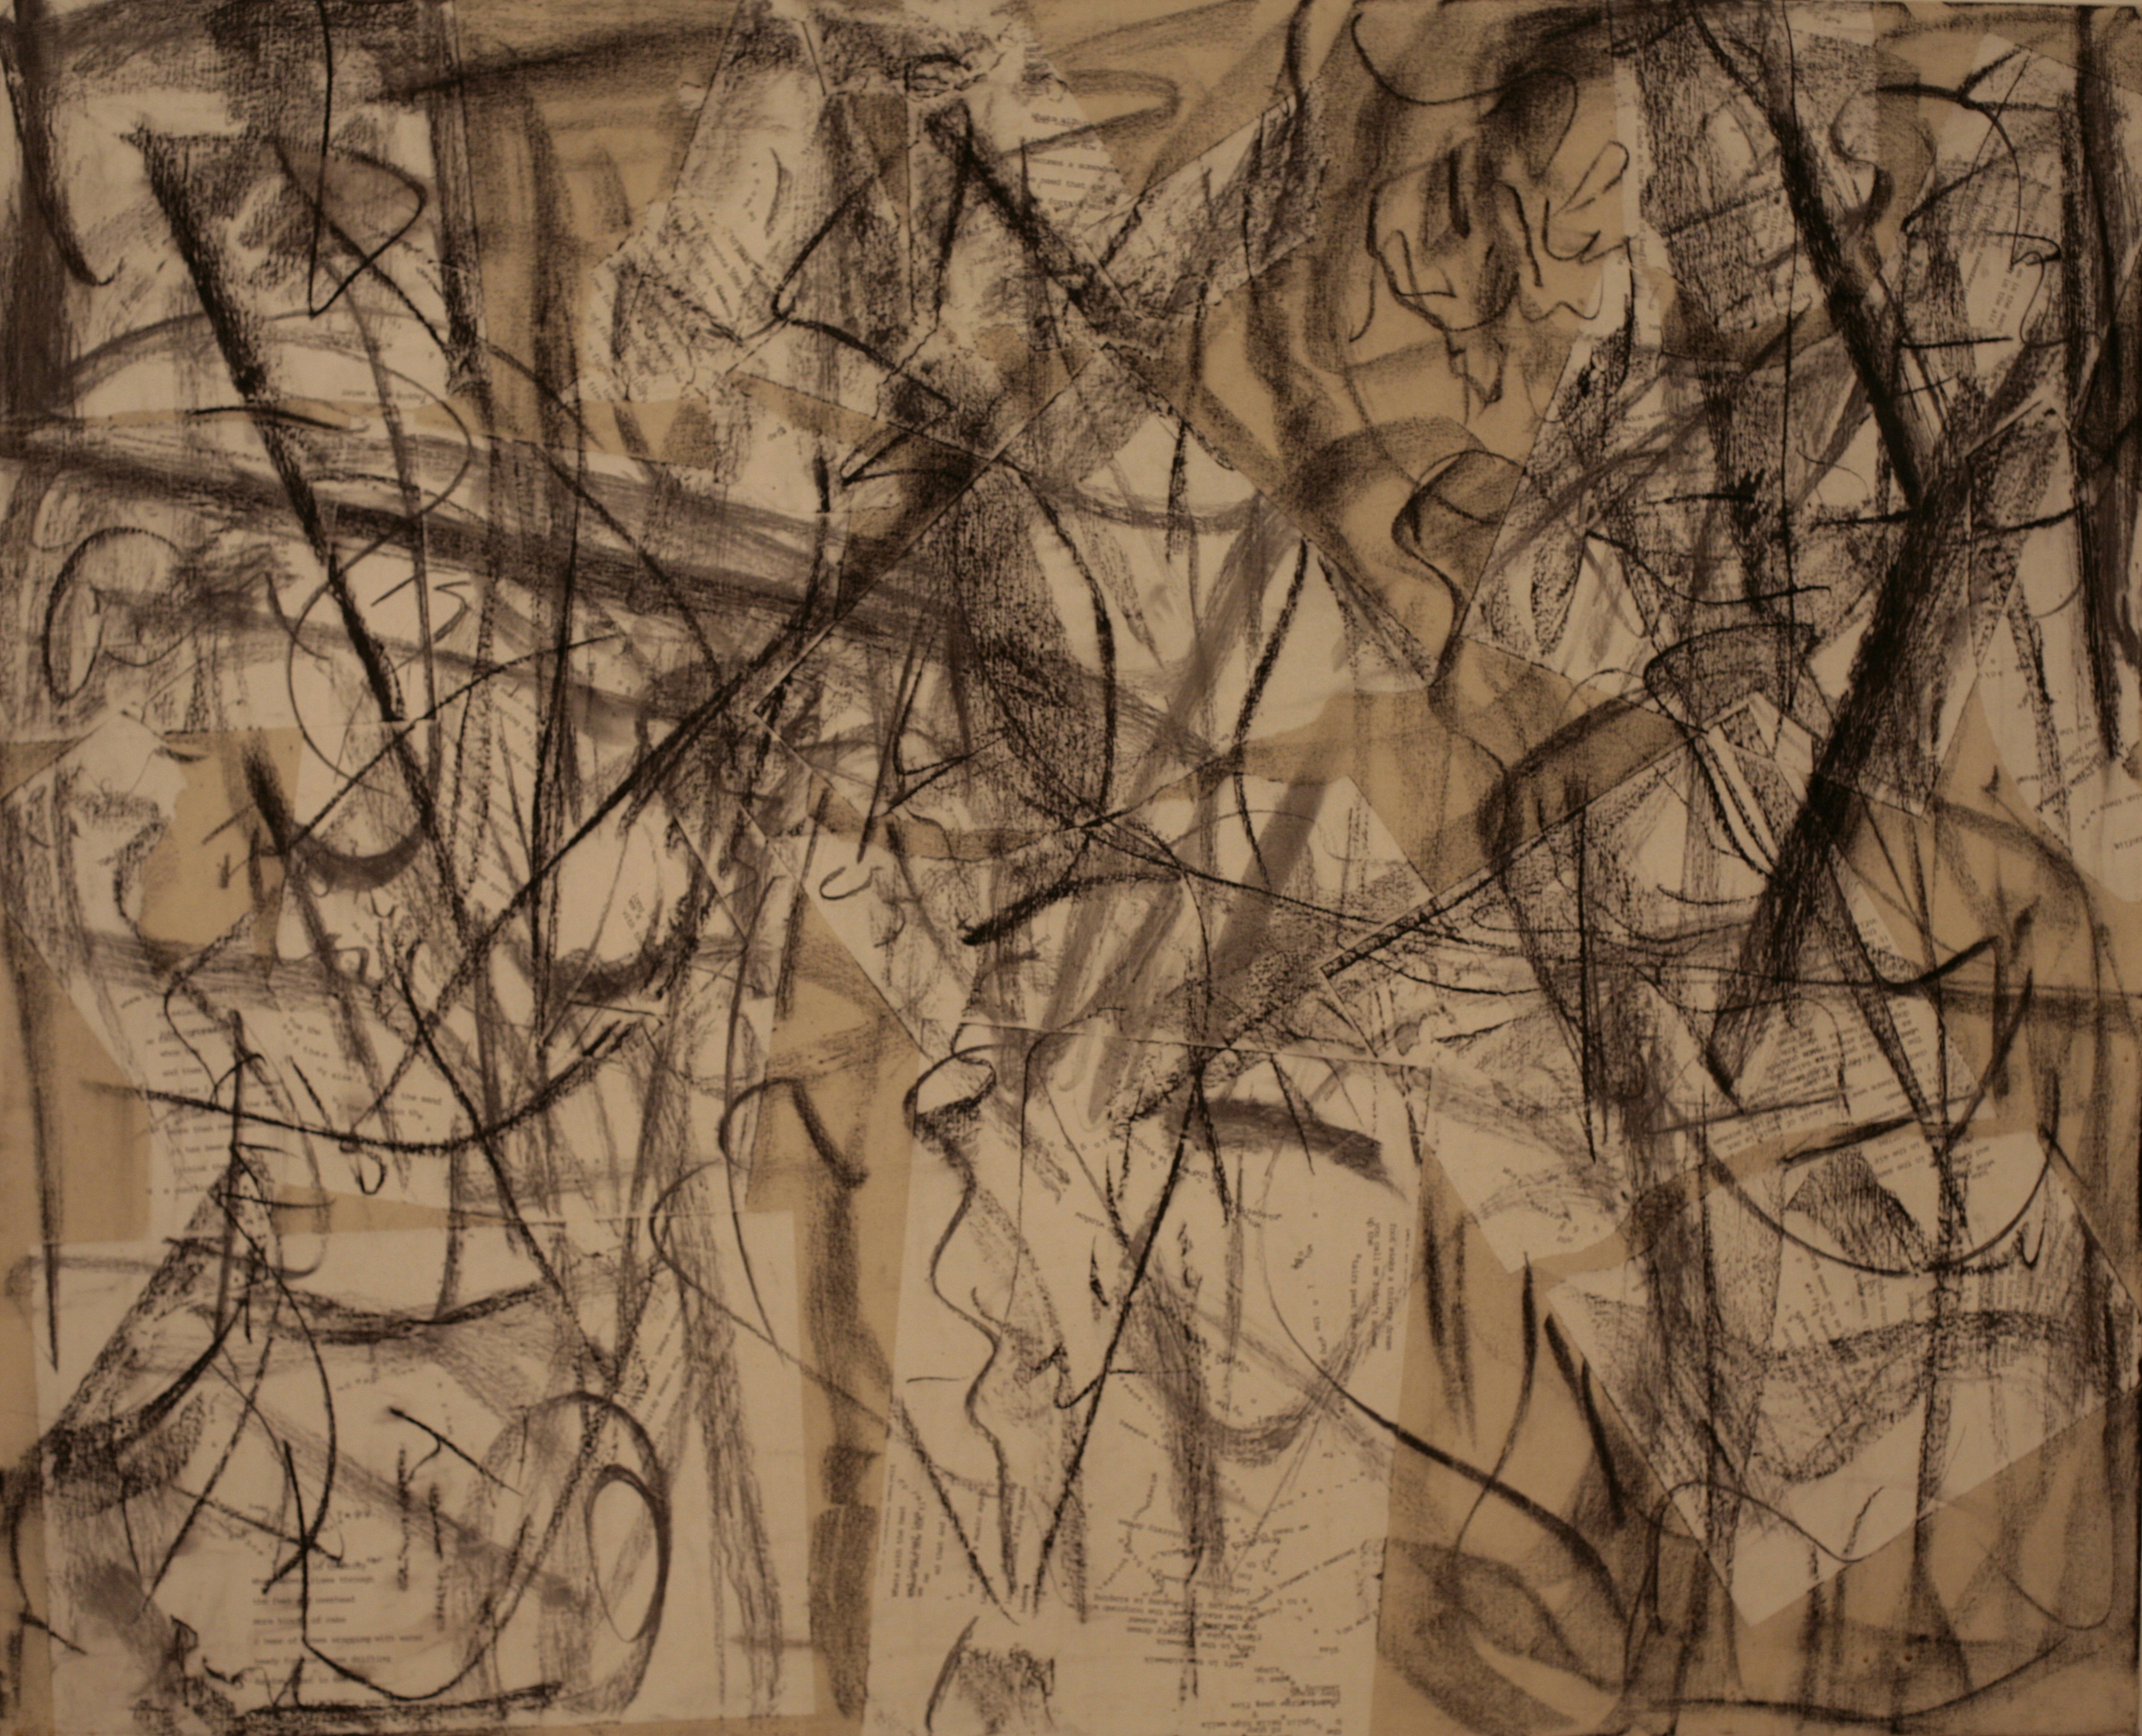 "Wordtree #14", charcoal and mixed media on canvas, 40"x48"